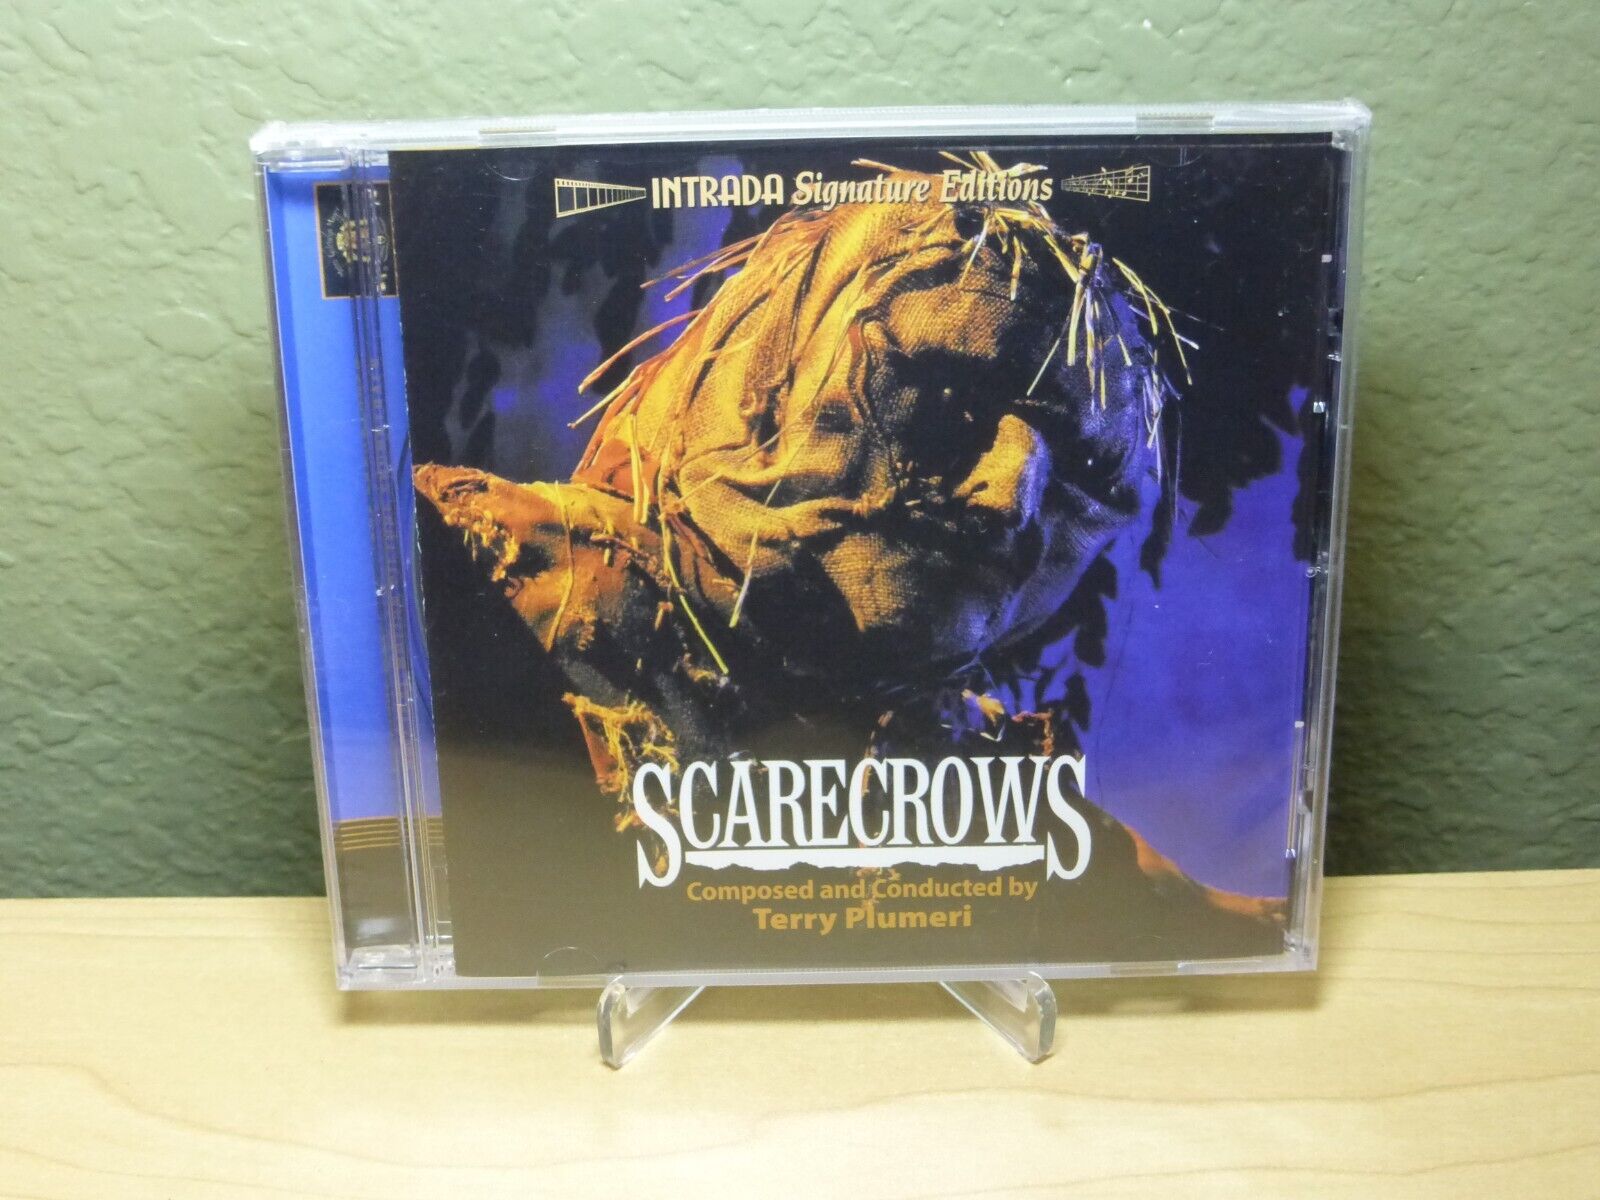 Scarecrows Soundtrack Terry Plumeri Intrada Limited Edition CD of 1,000 New OOP